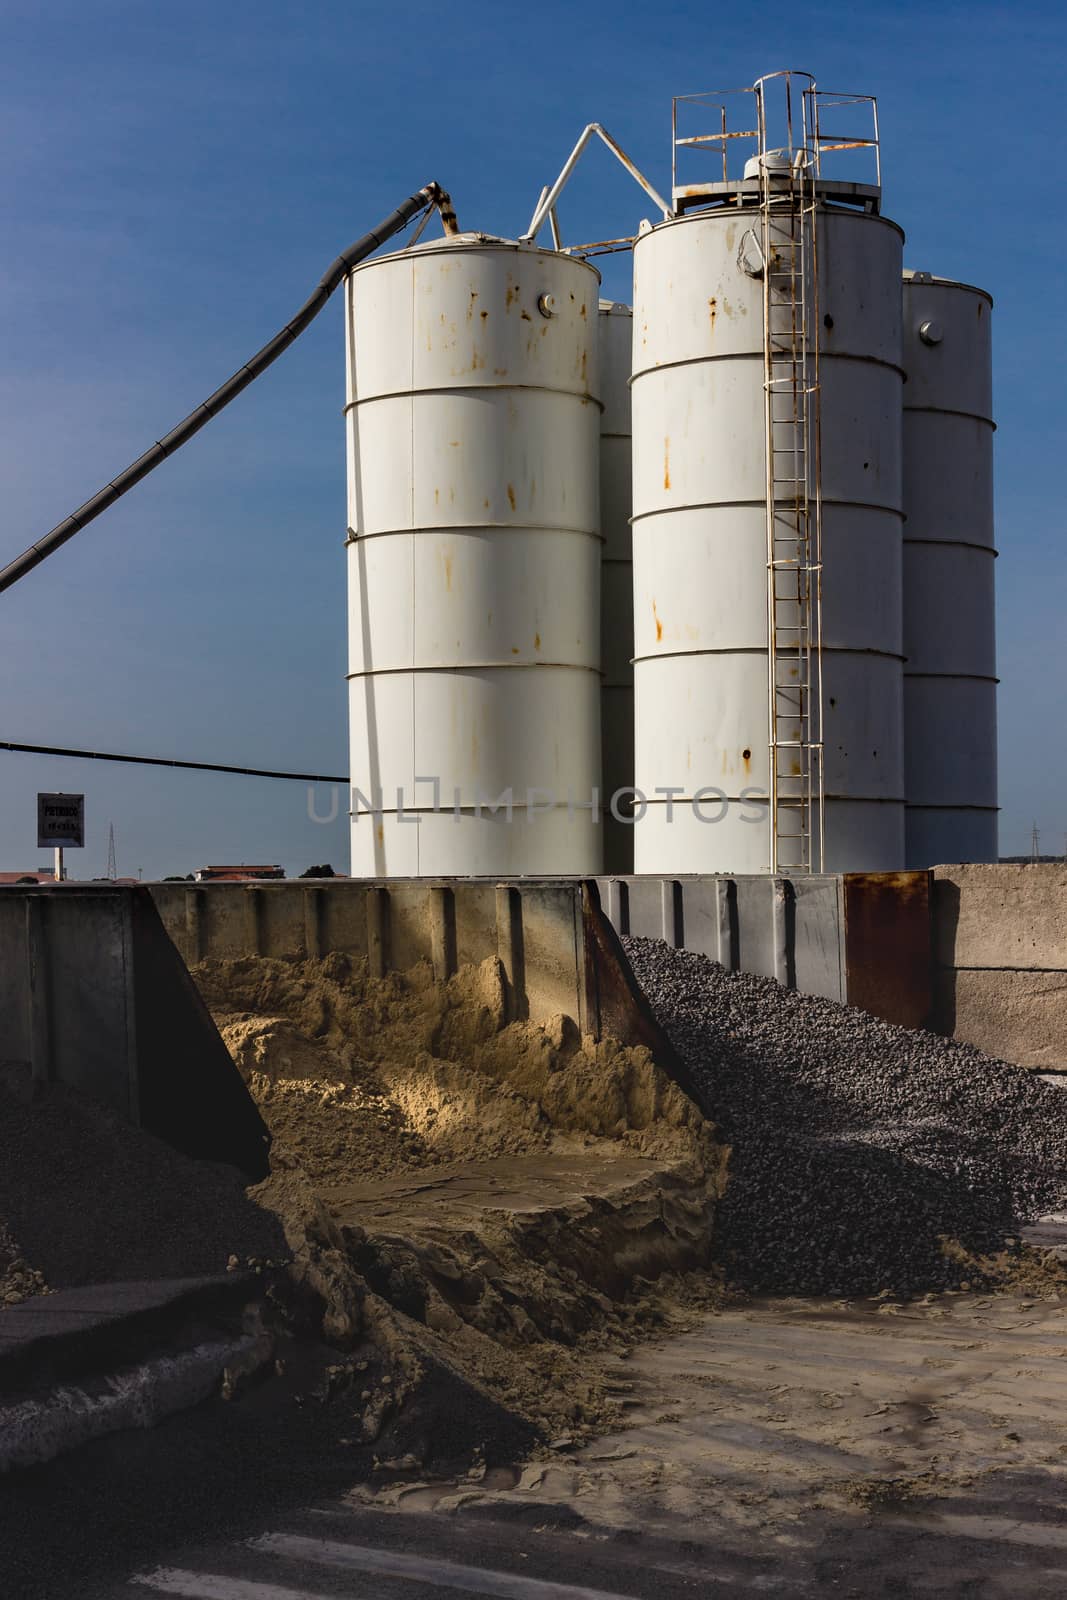 Cement industry and related silos